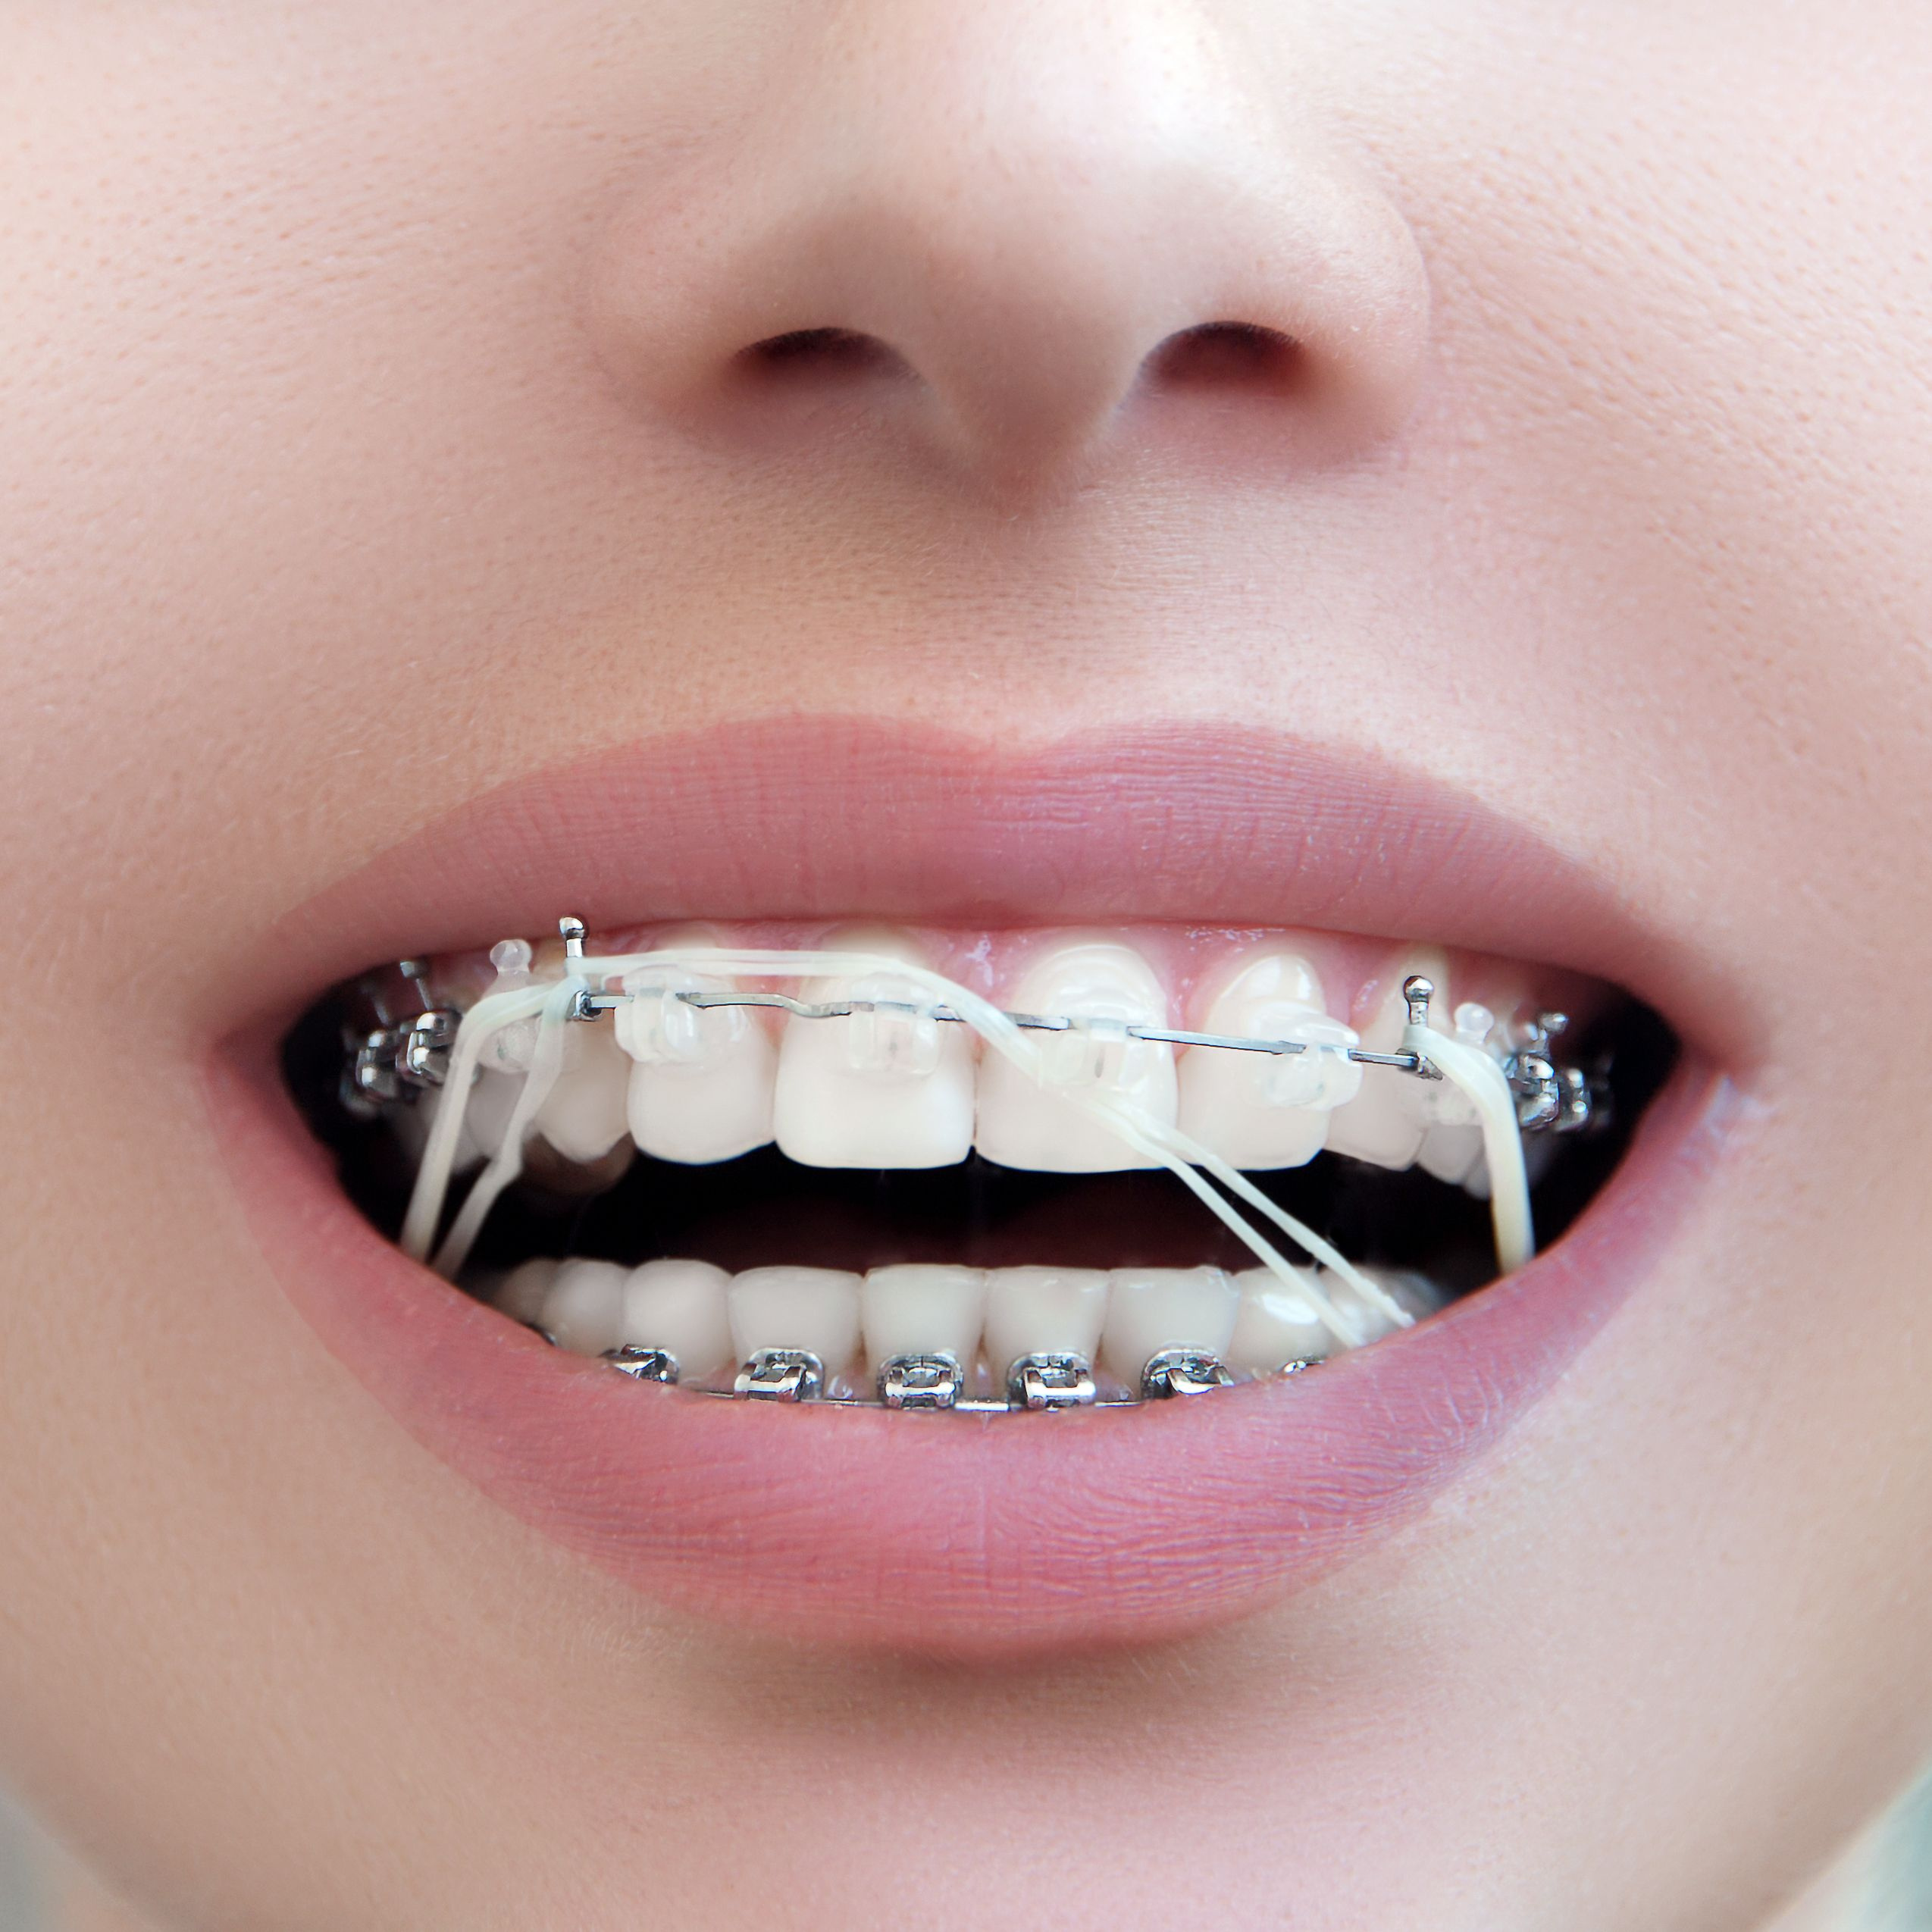 When Do South Houston Braces Patients Have to Wear Rubber Bands?